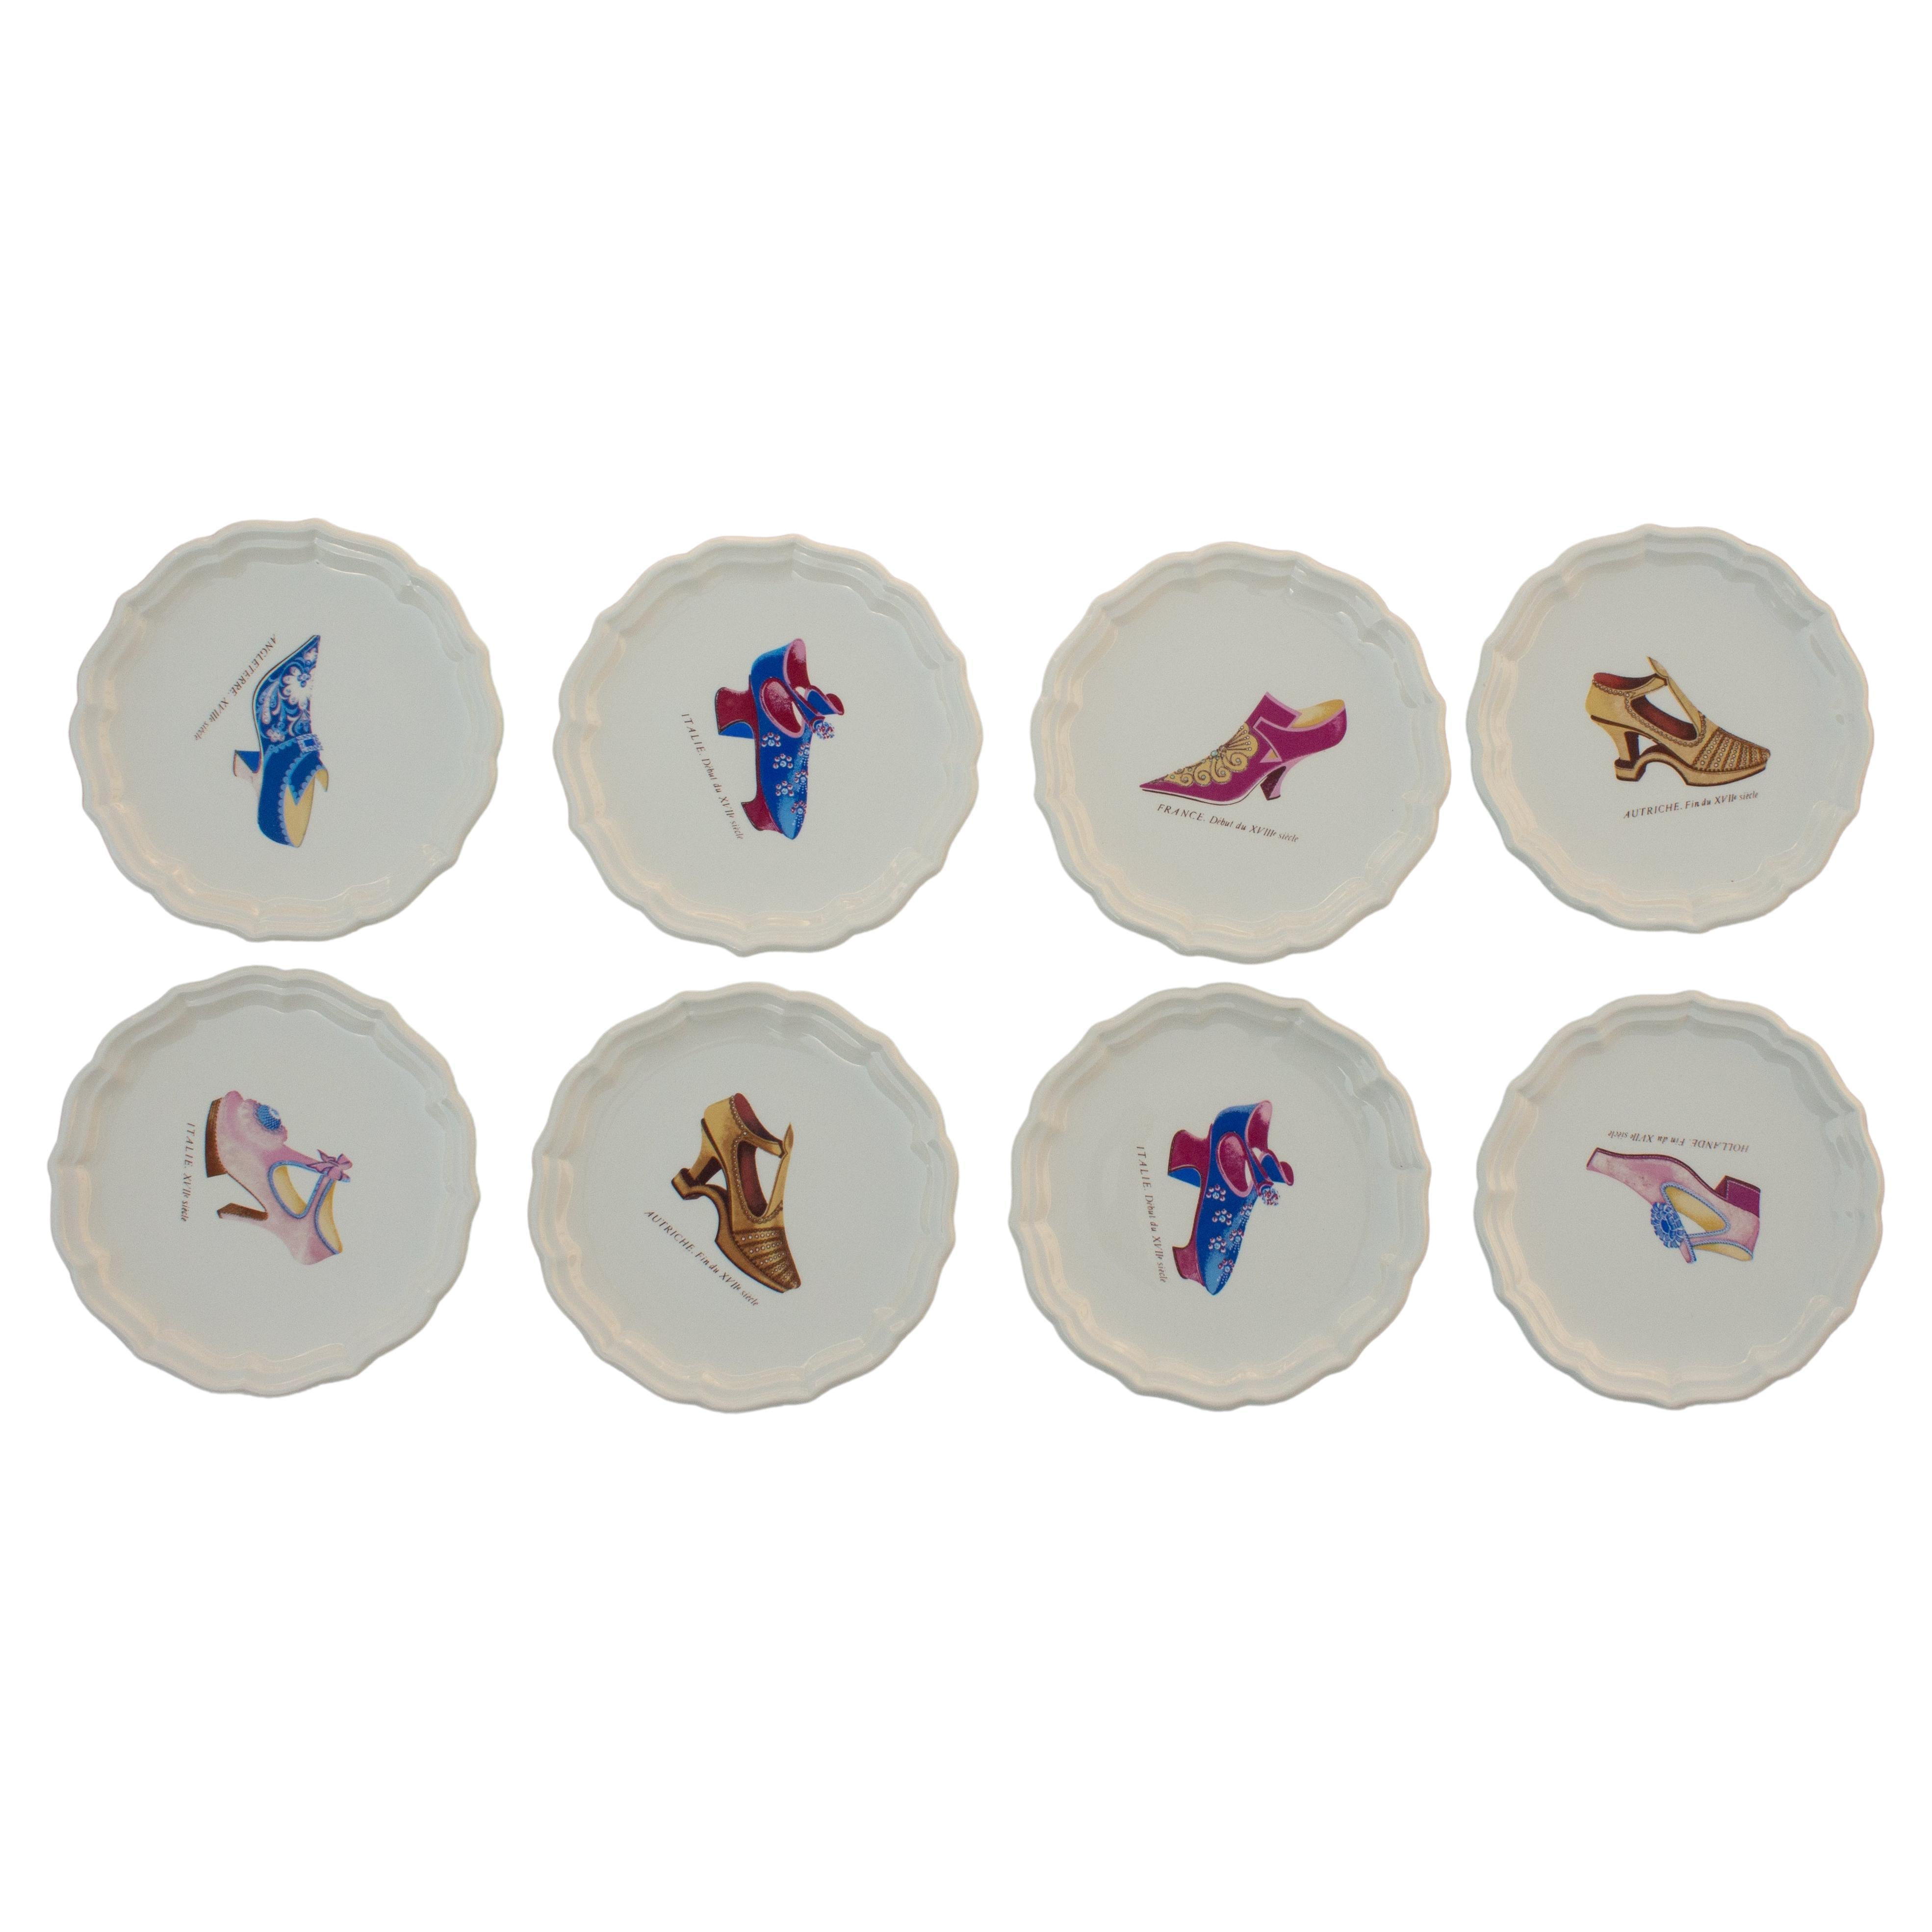 Eight Serving Plates, Collection V. Guillen, Edition Charles Jourdan